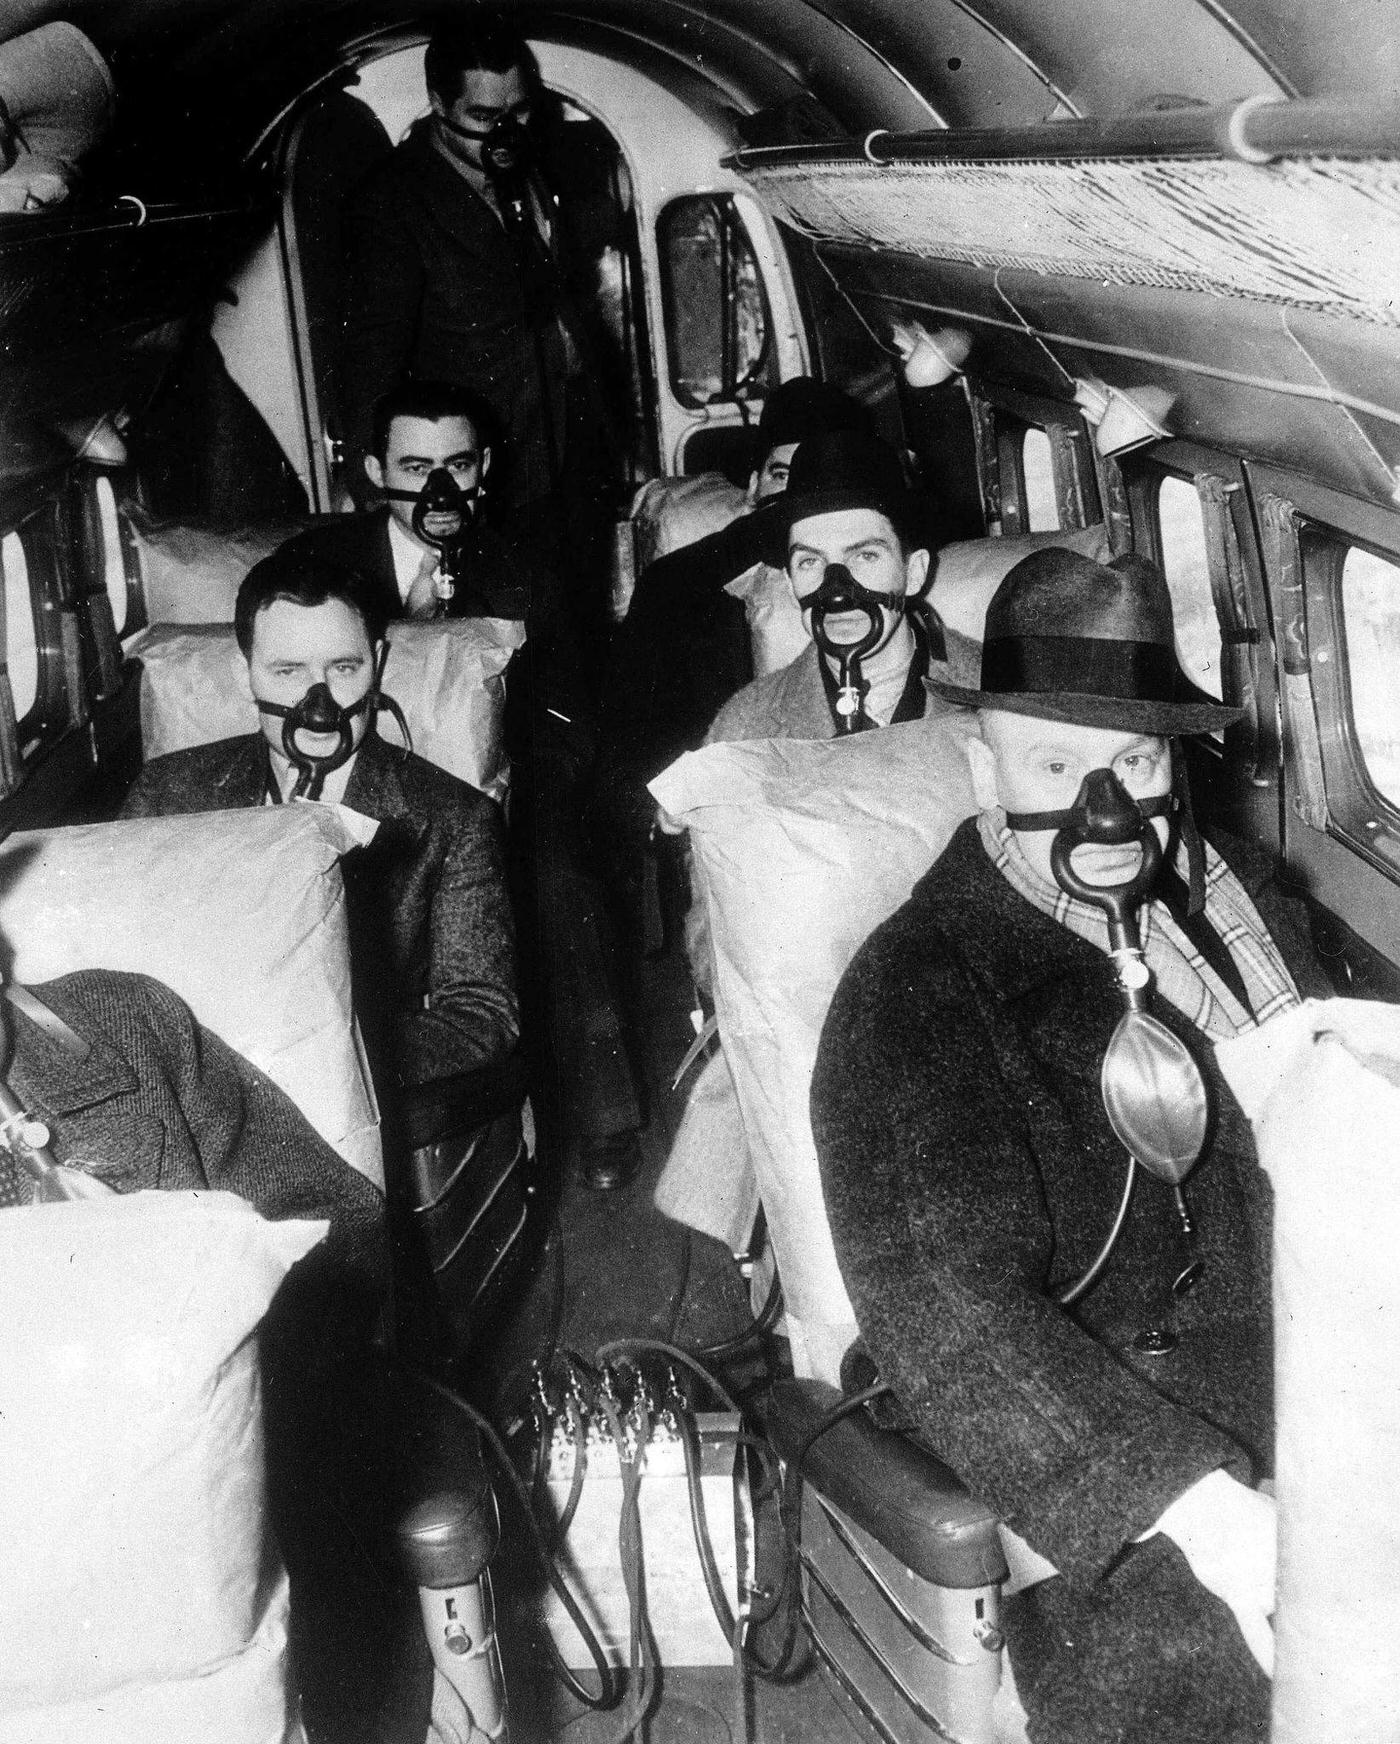 American Airline passengers make the first stratosphere flight test. The picture shows passengers breathing through their special masks during the flight.